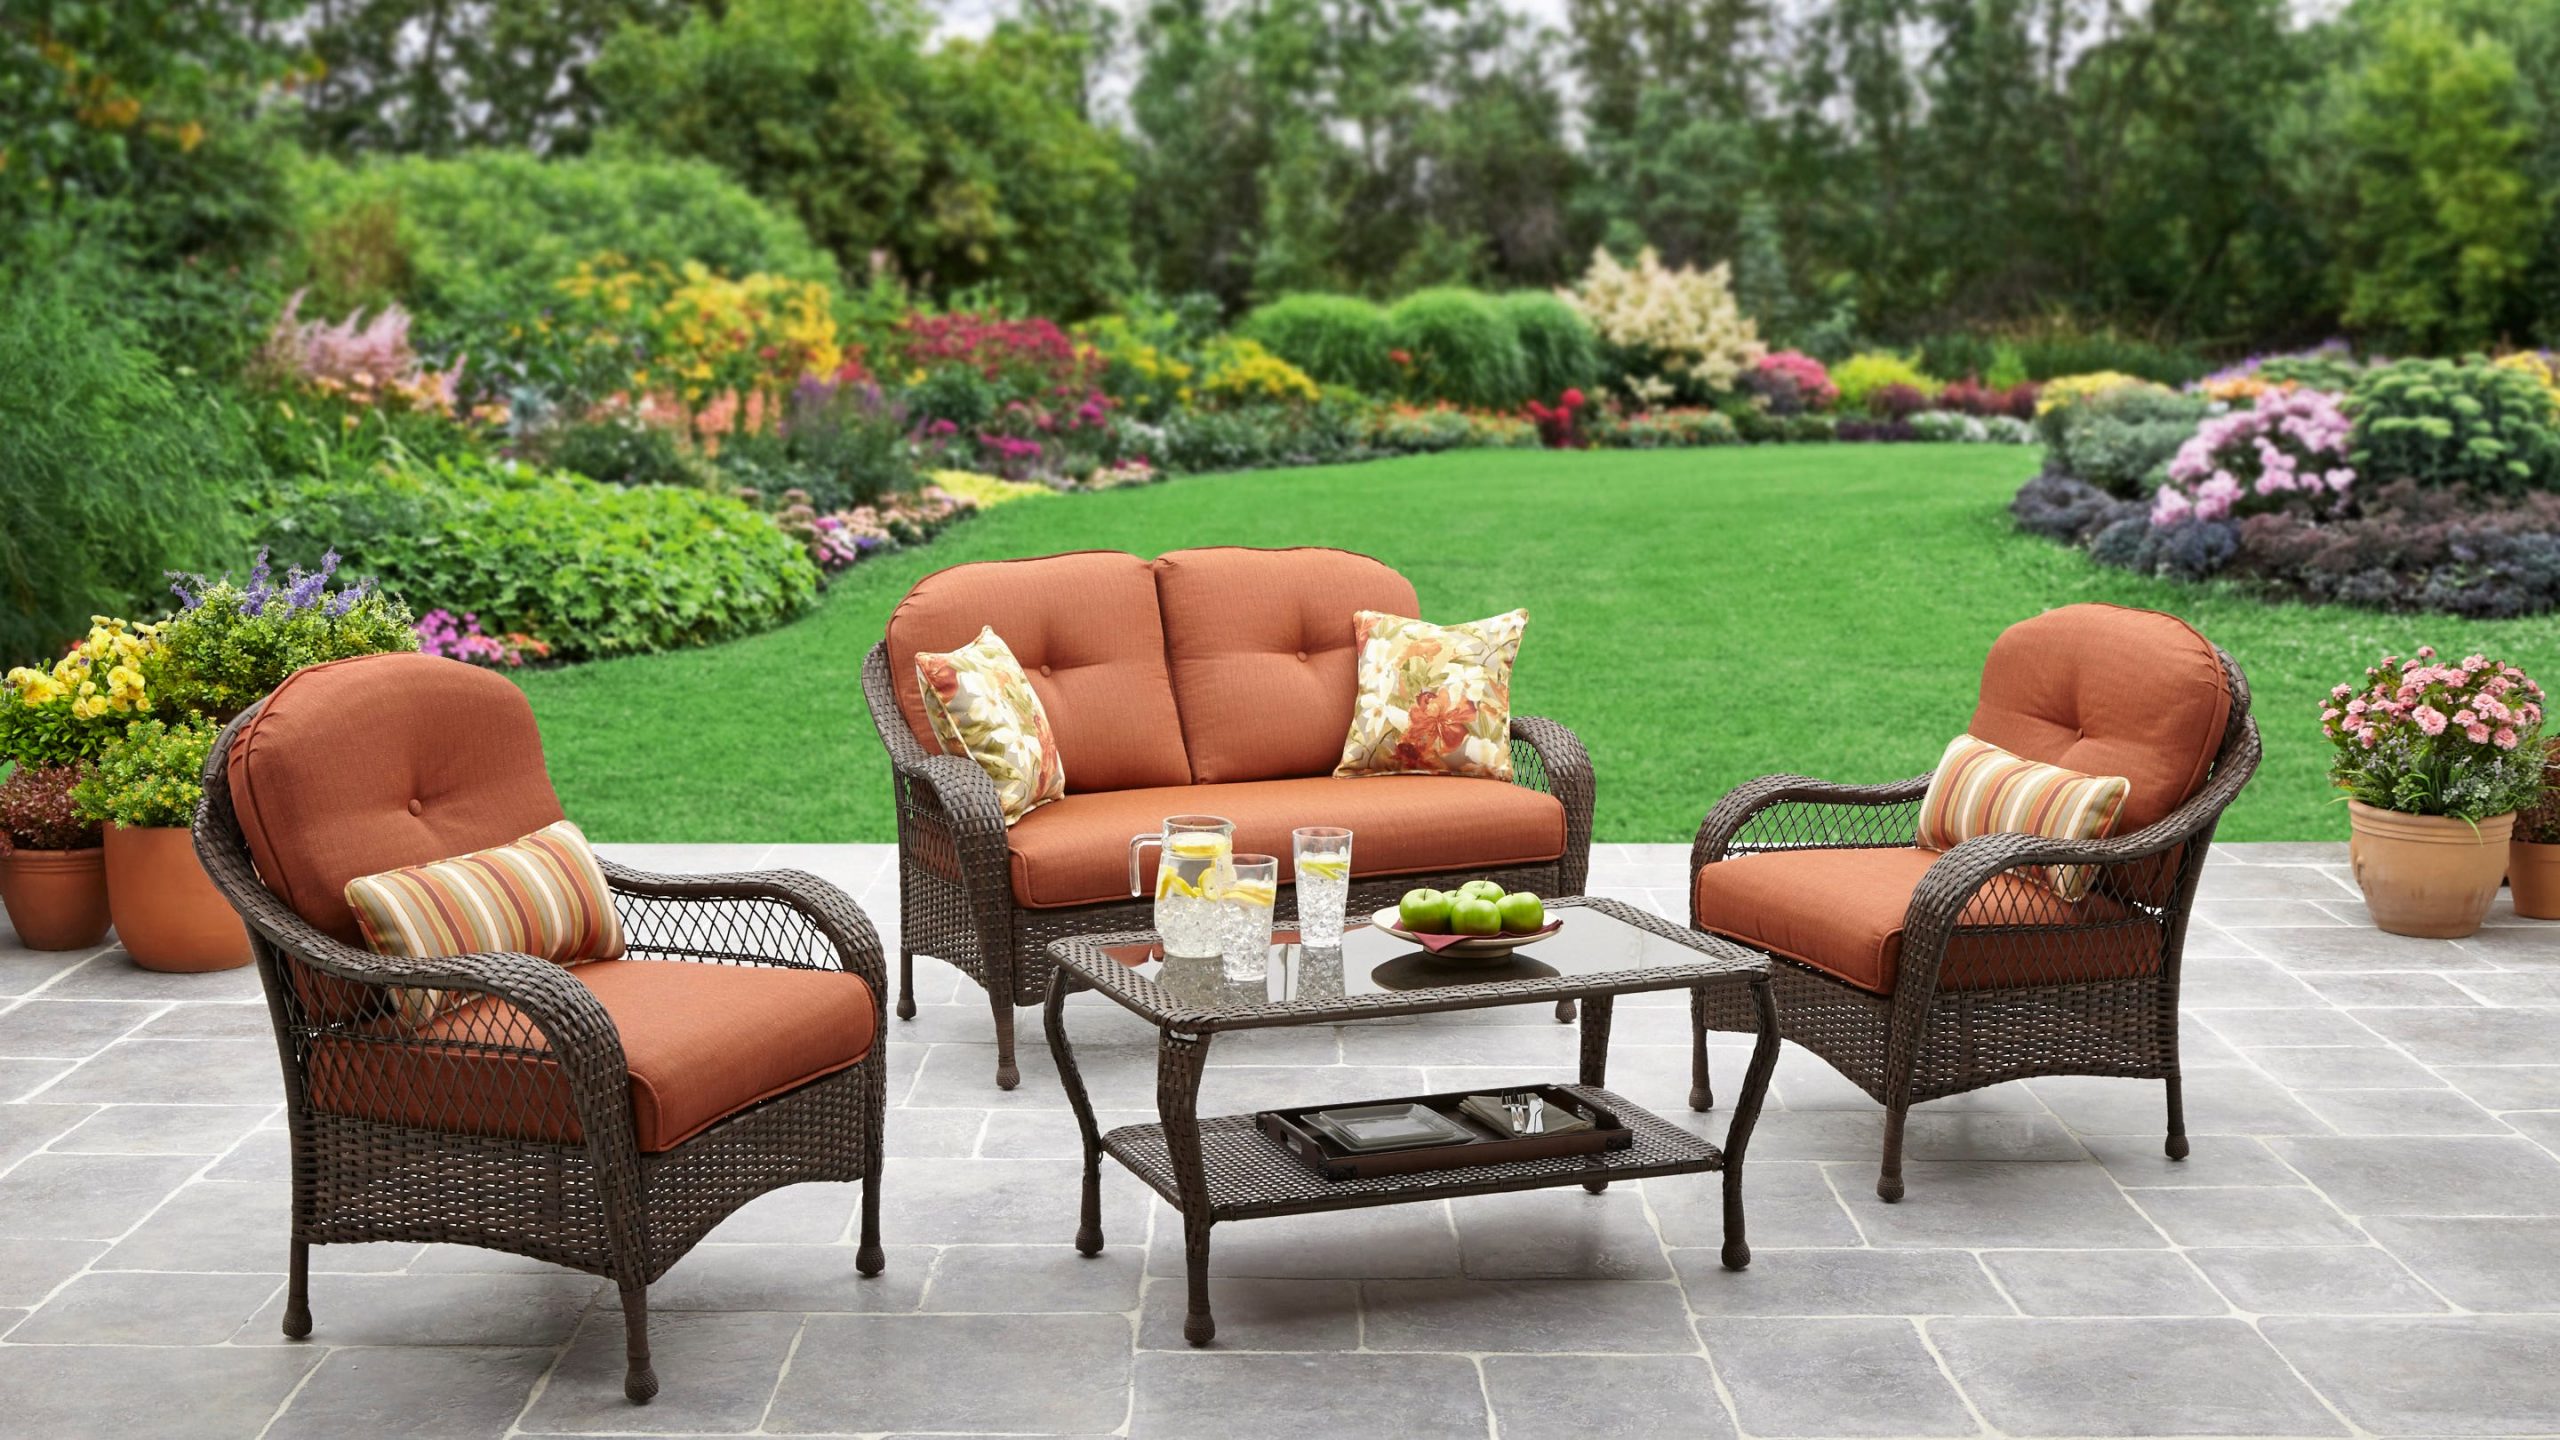 7 Best Tips for Choosing the Best Patio Furniture